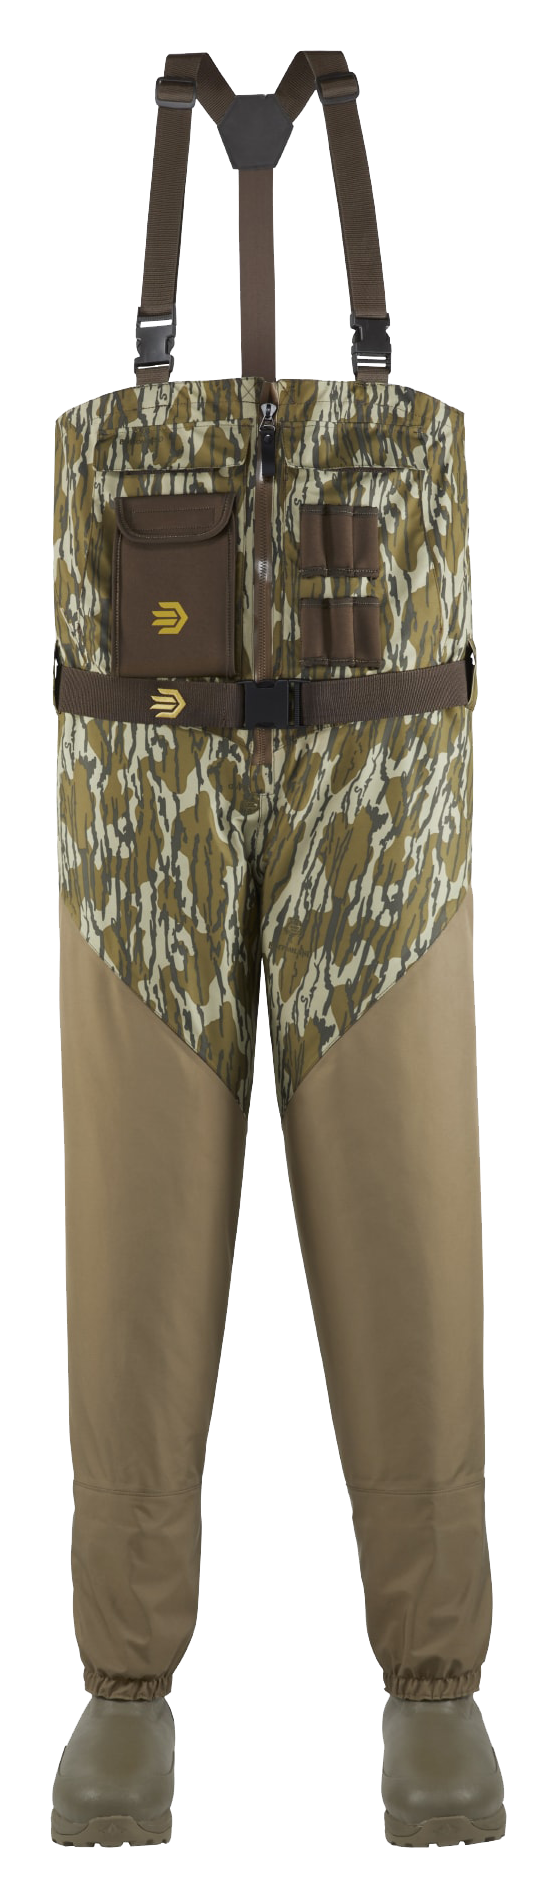 LaCrosse Alpha Agility Select Insulated Front-Zip Breathable Hunting Waders for Men - Mossy Oak Original Bottomland - 12/King